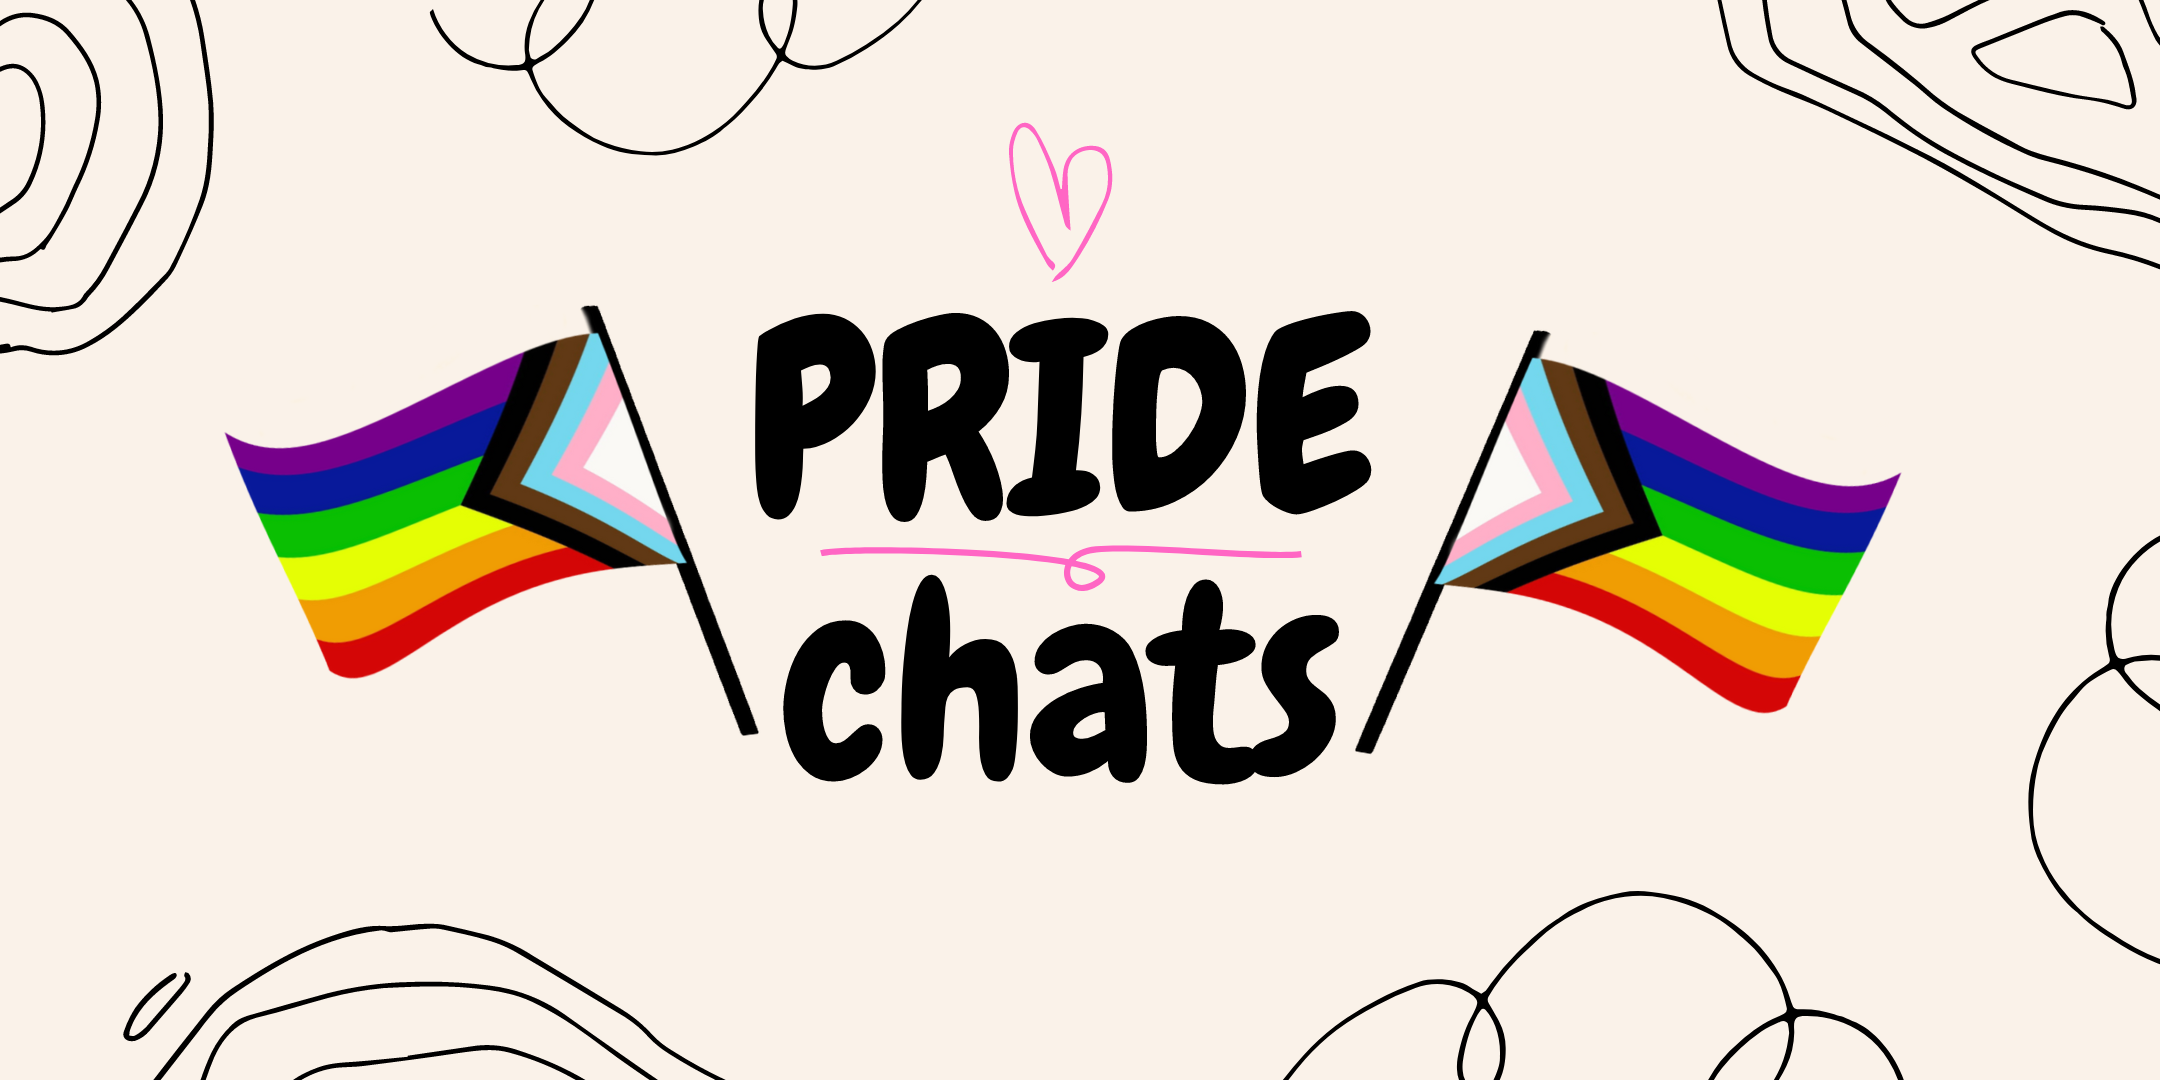 <img src="RTG_PRIDE chats_EventBanner.png" alt="Pride chats are virtual events to celebrate and spotlight different elements of Pride and matters important to LGBTQ+ communities">